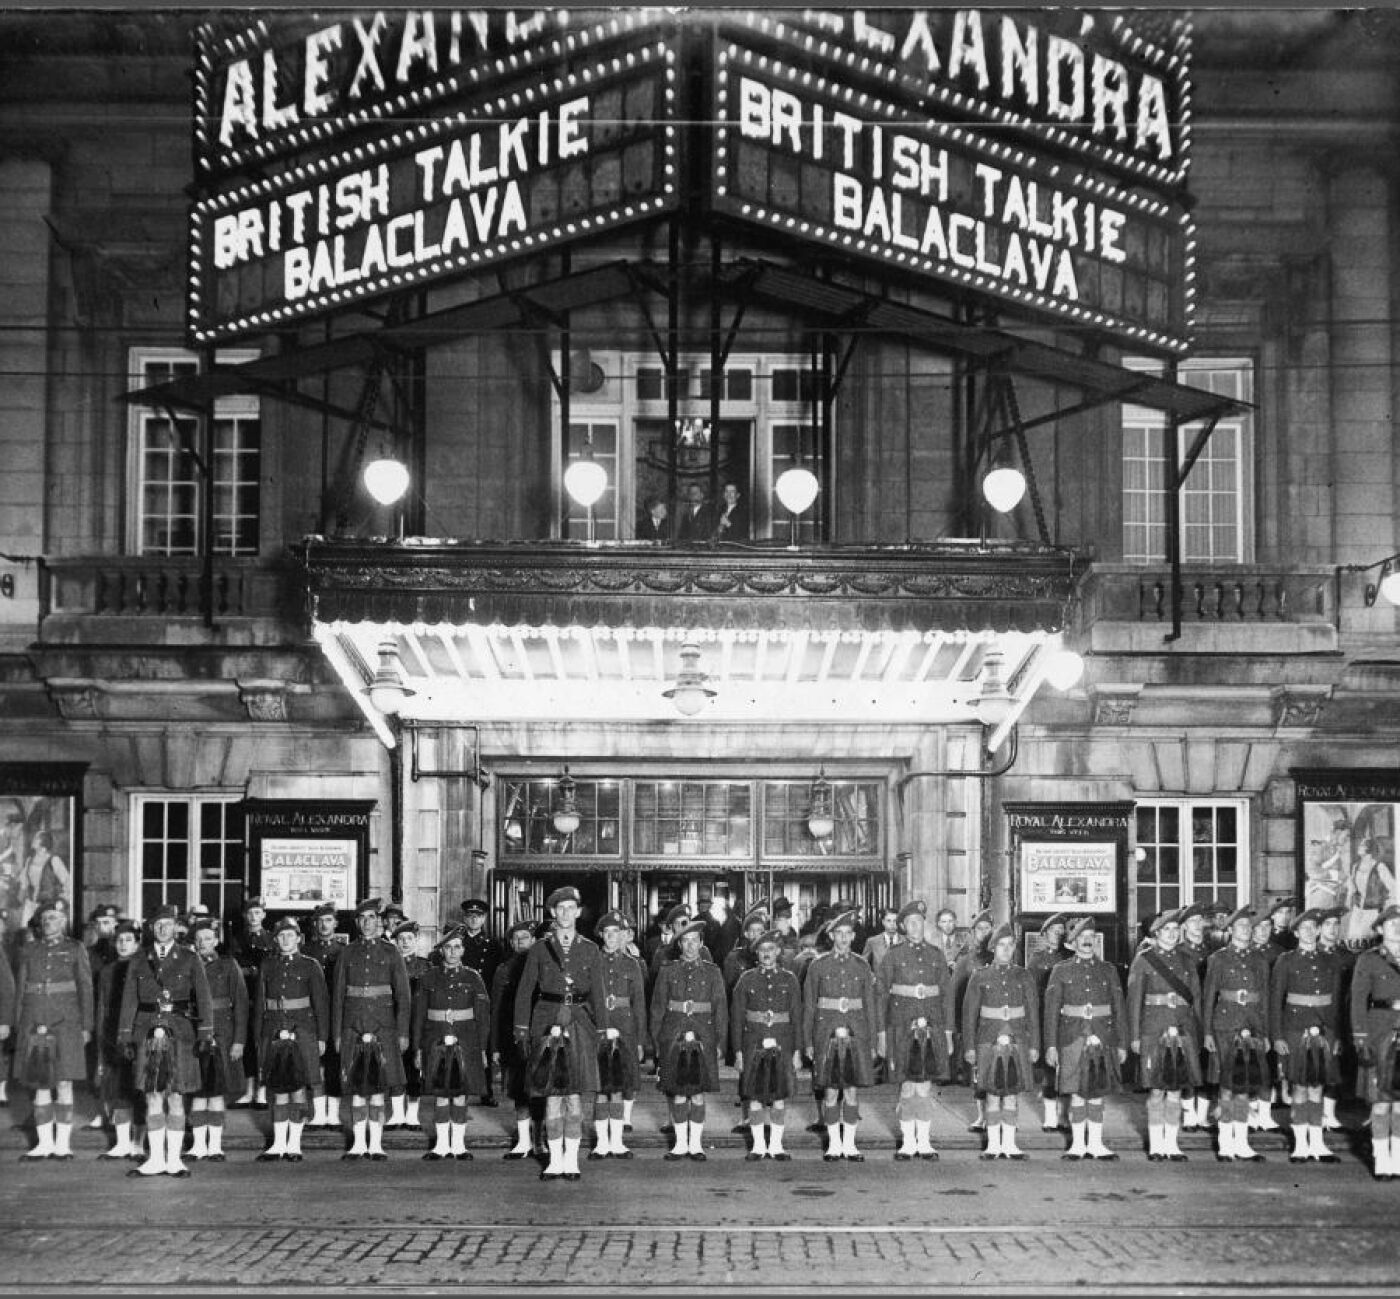 A black and white photo of a bright and lit up theatre. Rows of men in uniform stand in front of it.